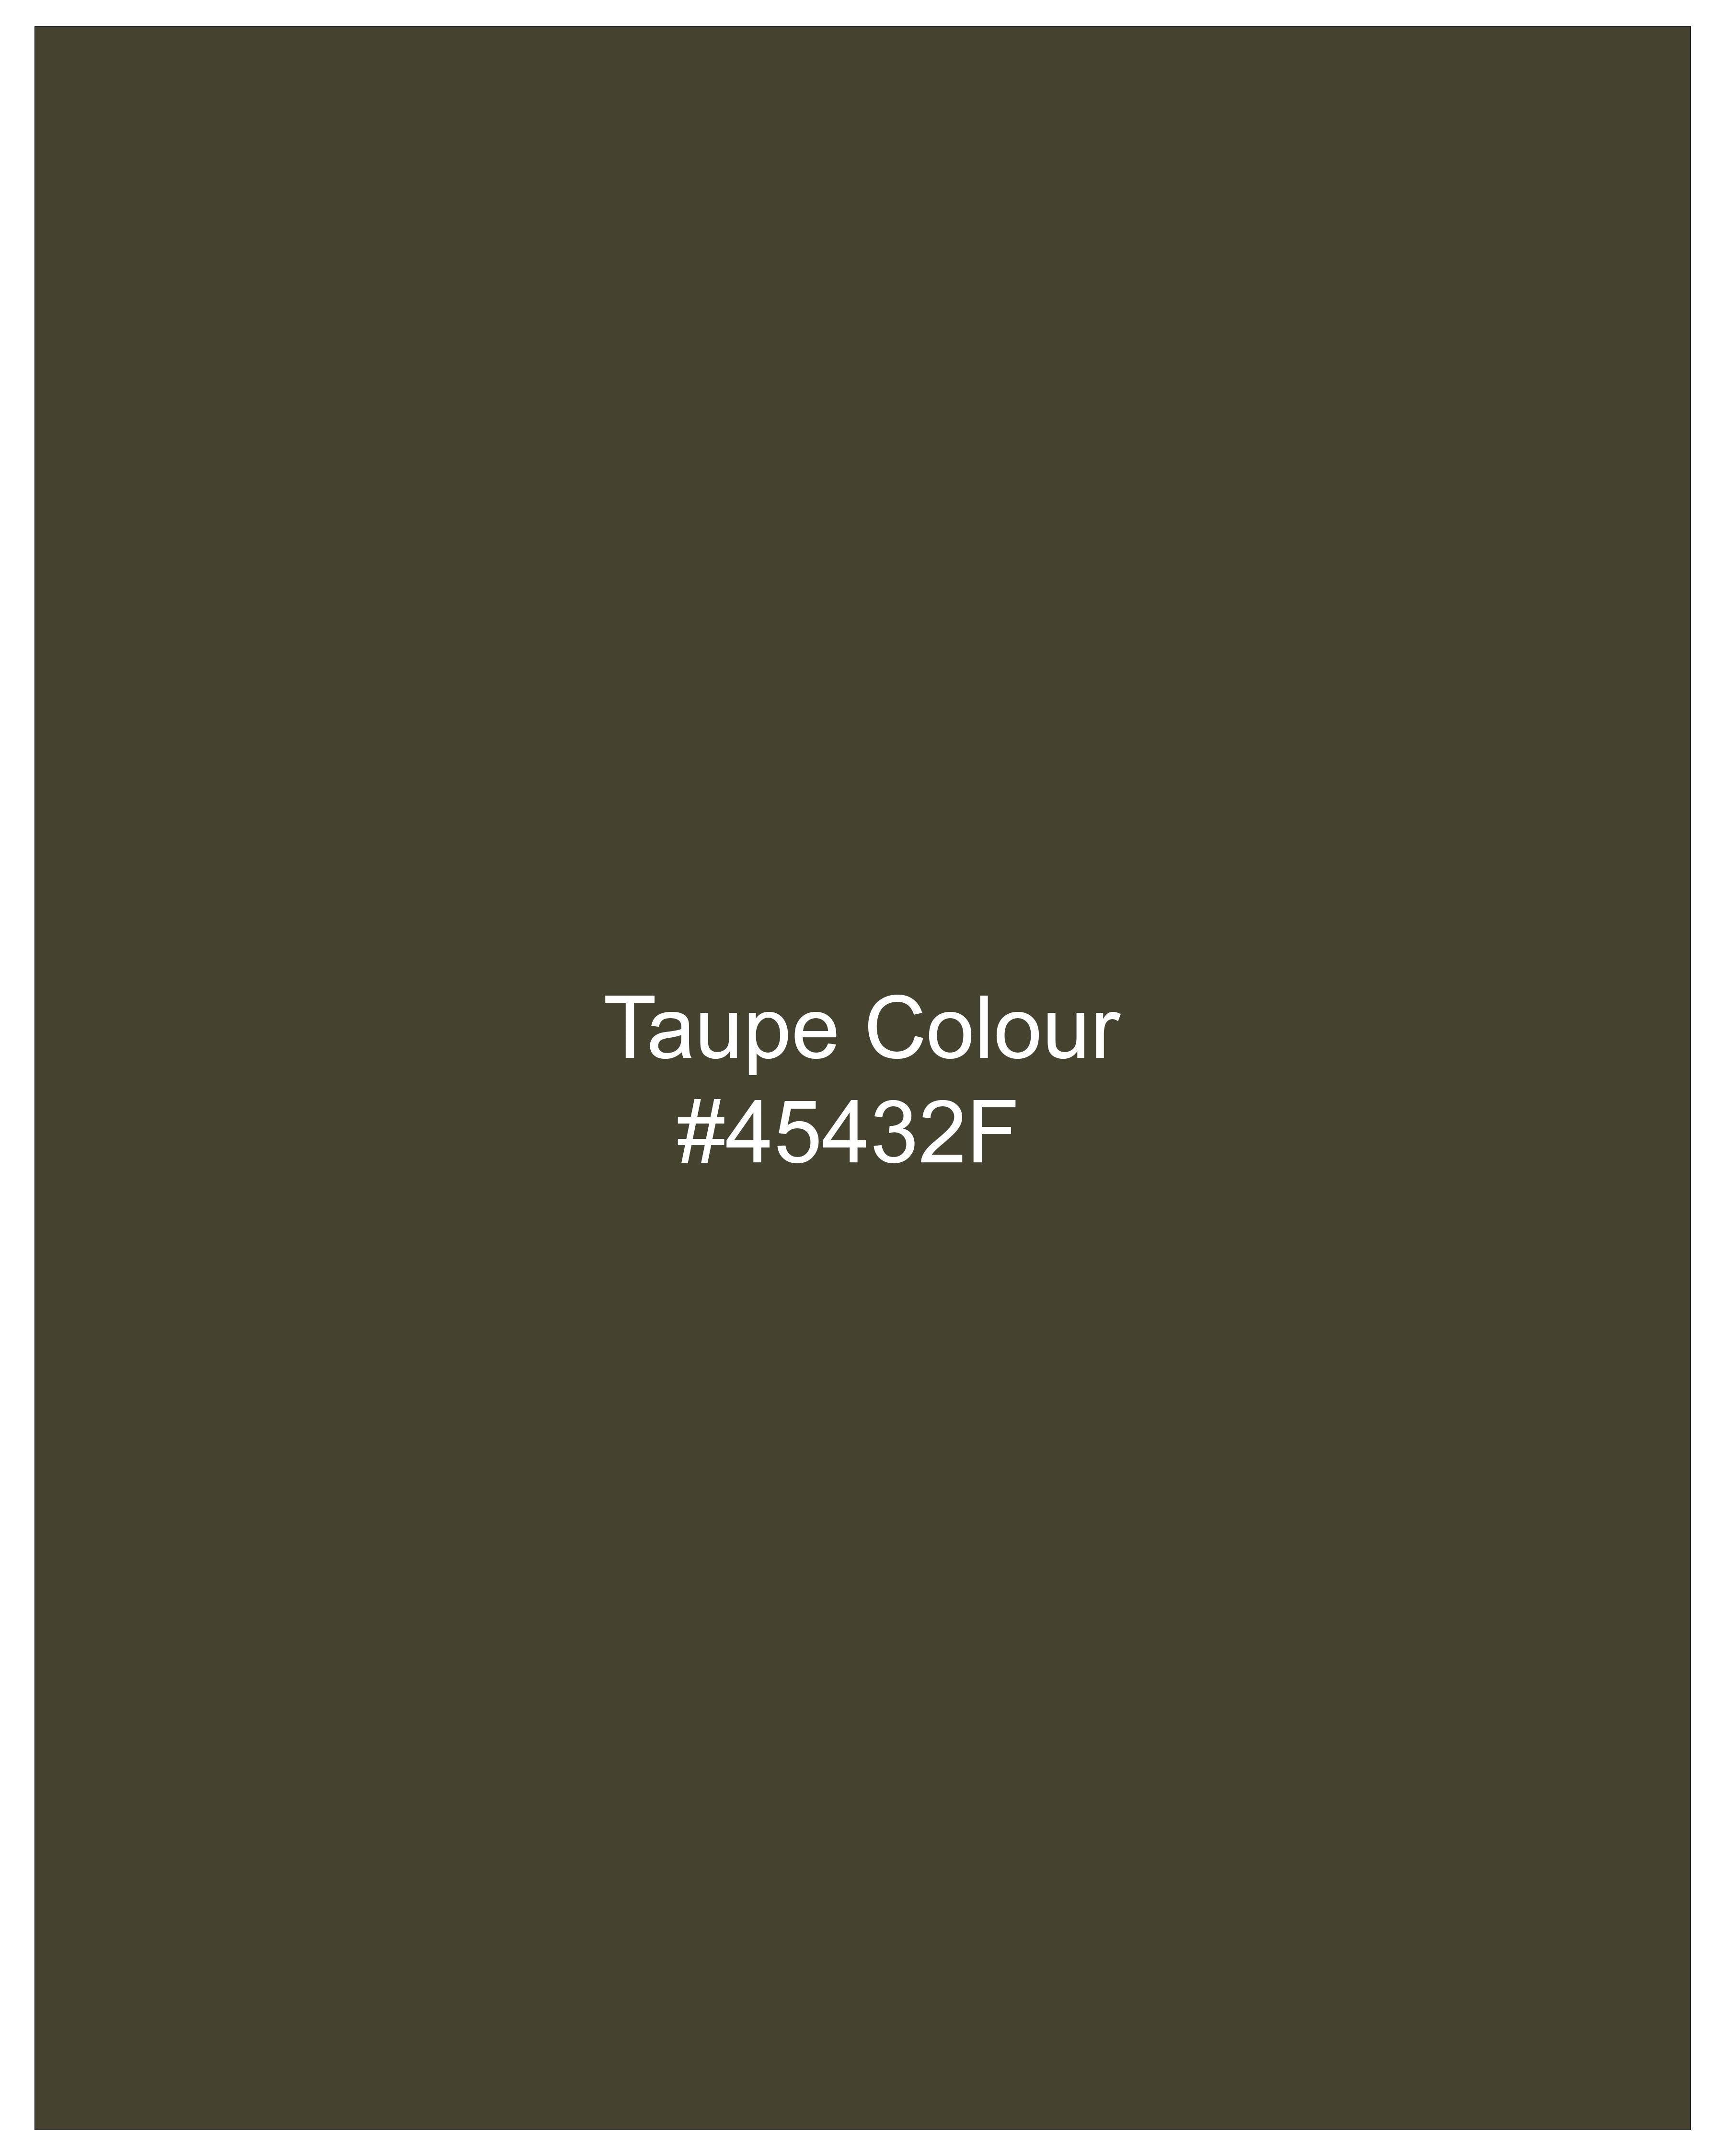 Taupe Green Solid Stretchable Premium Cotton Traveler Suit ST2642-SB-36, ST2642-SB-38, ST2642-SB-40, ST2642-SB-42, ST2642-SB-44, ST2642-SB-46, ST2642-SB-48, ST2642-SB-50, ST2642-SB-52, ST2642-SB-54, ST2642-SB-56, ST2642-SB-58, ST2642-SB-60